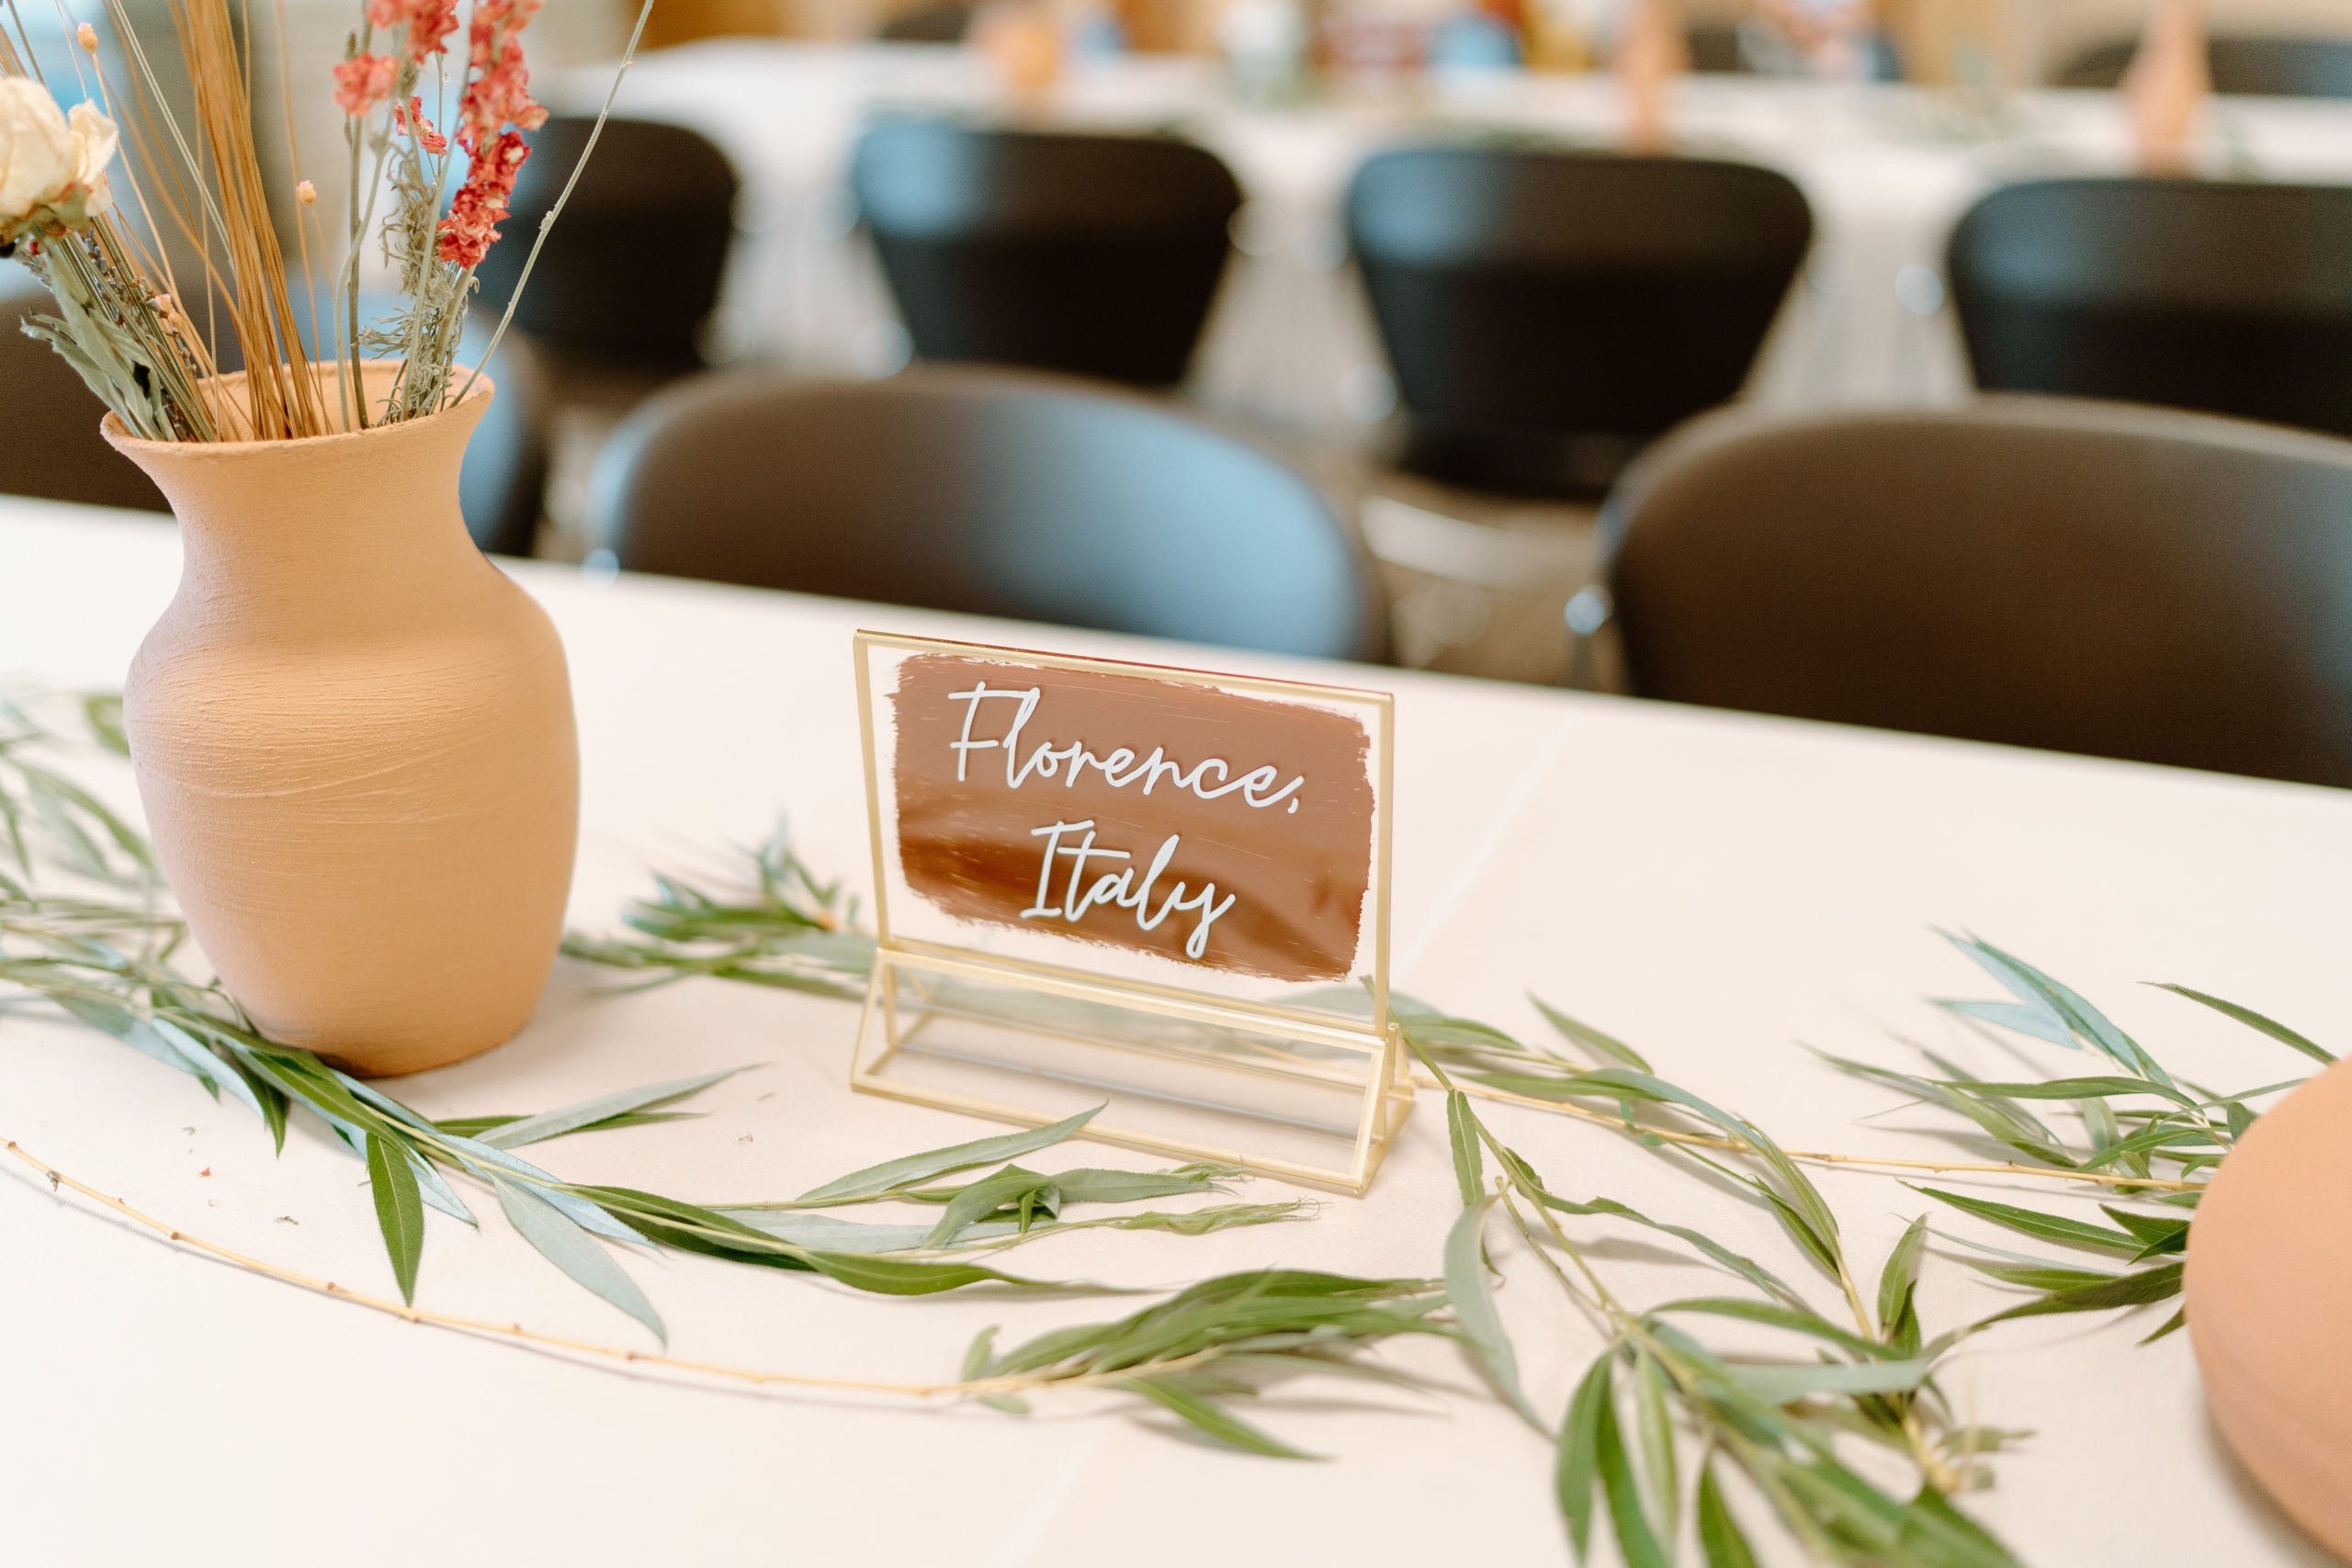 This is a picture of the wedding details on tables